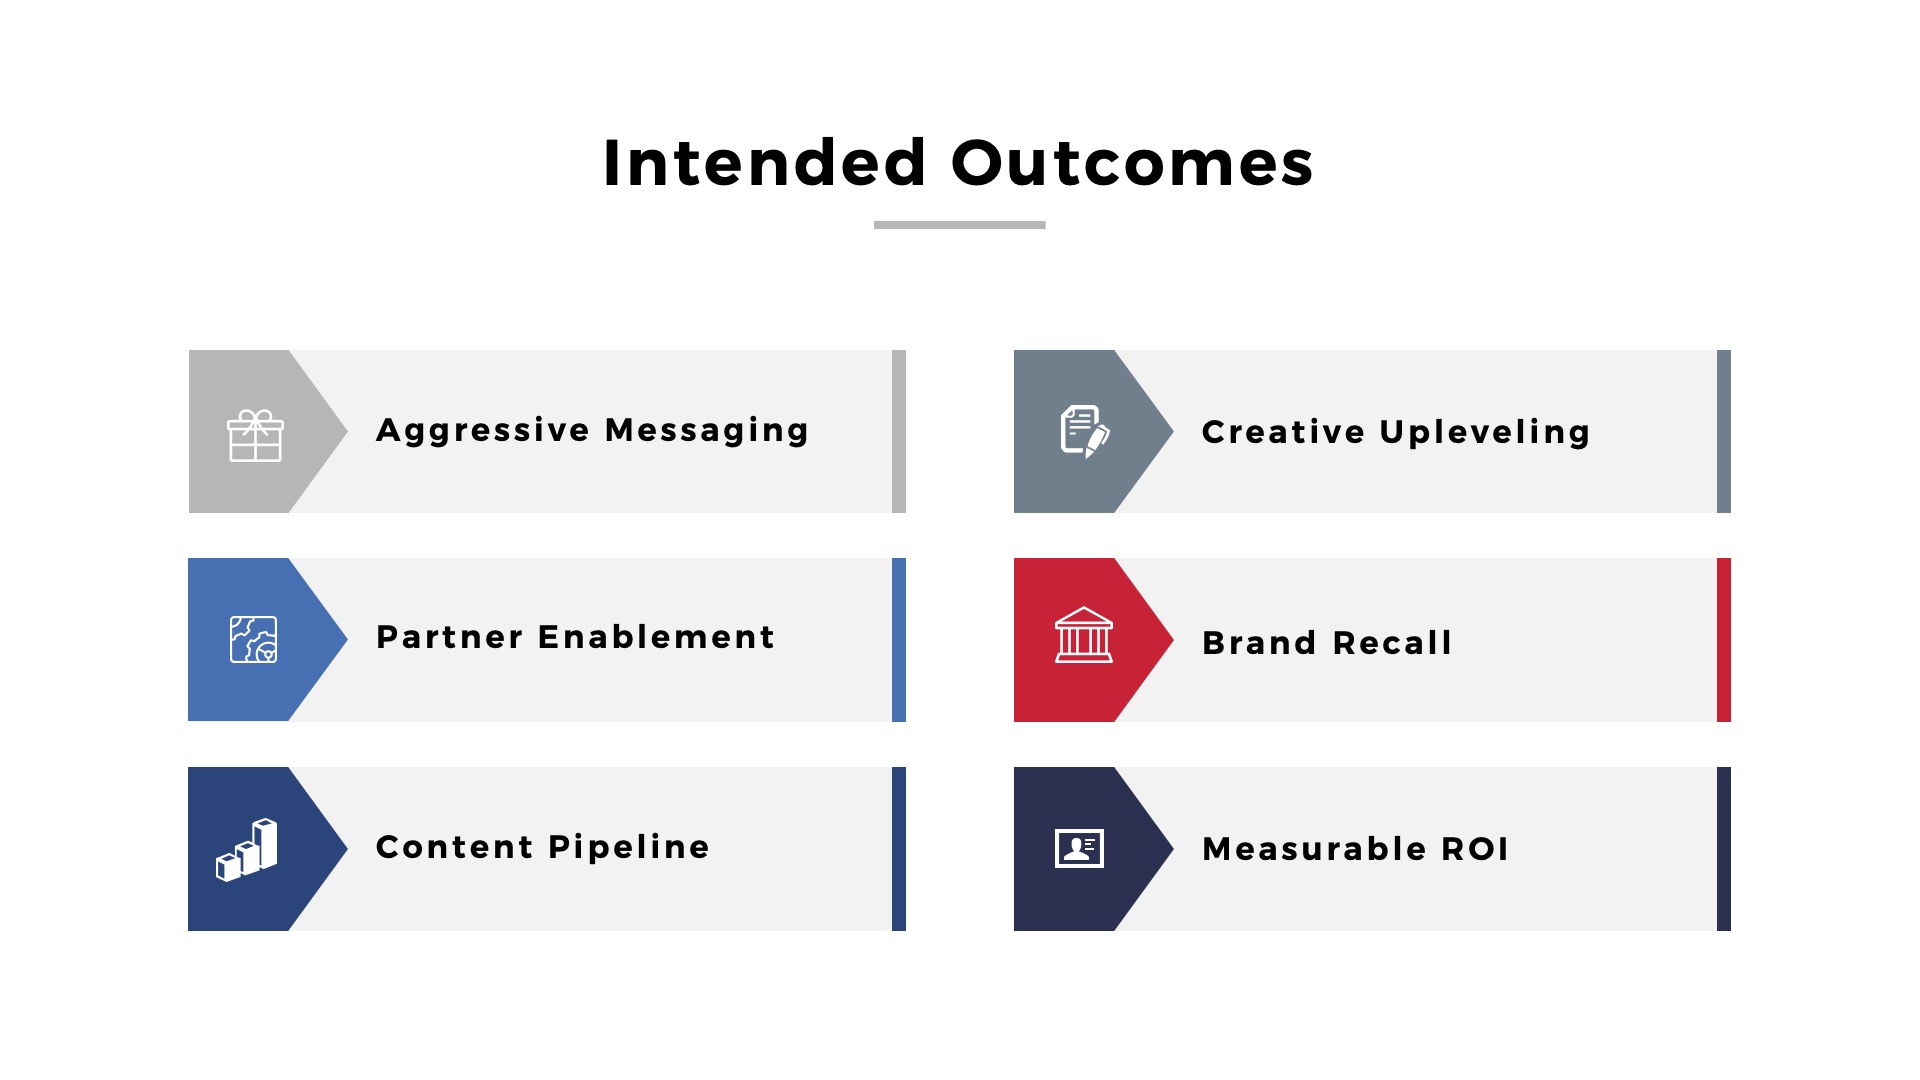 marketing plan intended outcomes aggressive messaging partner enablement content pipeline creative upleveling brand recall measurable roi